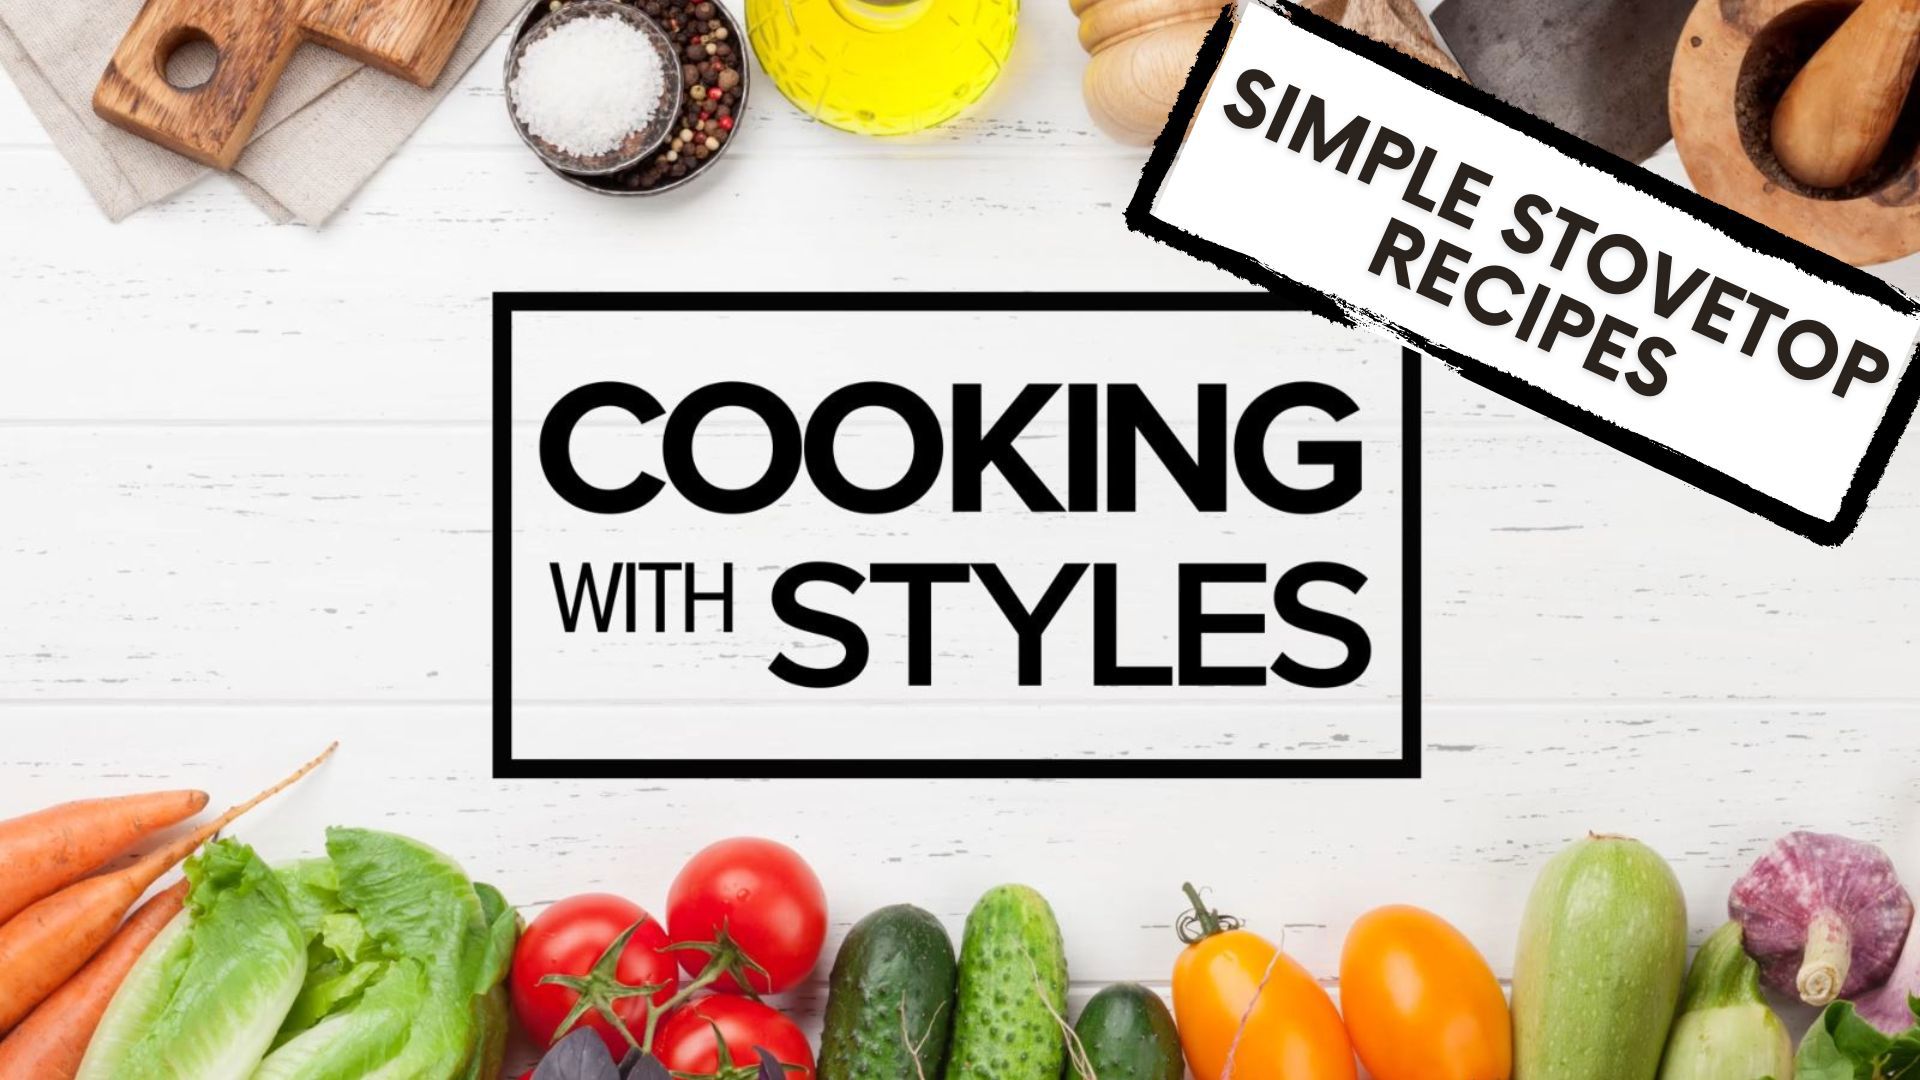 Shawn Styles shares simple and elegant recipes you can make on your stovetop. From steak to carbonara and chicken marsala there is something for everyone.